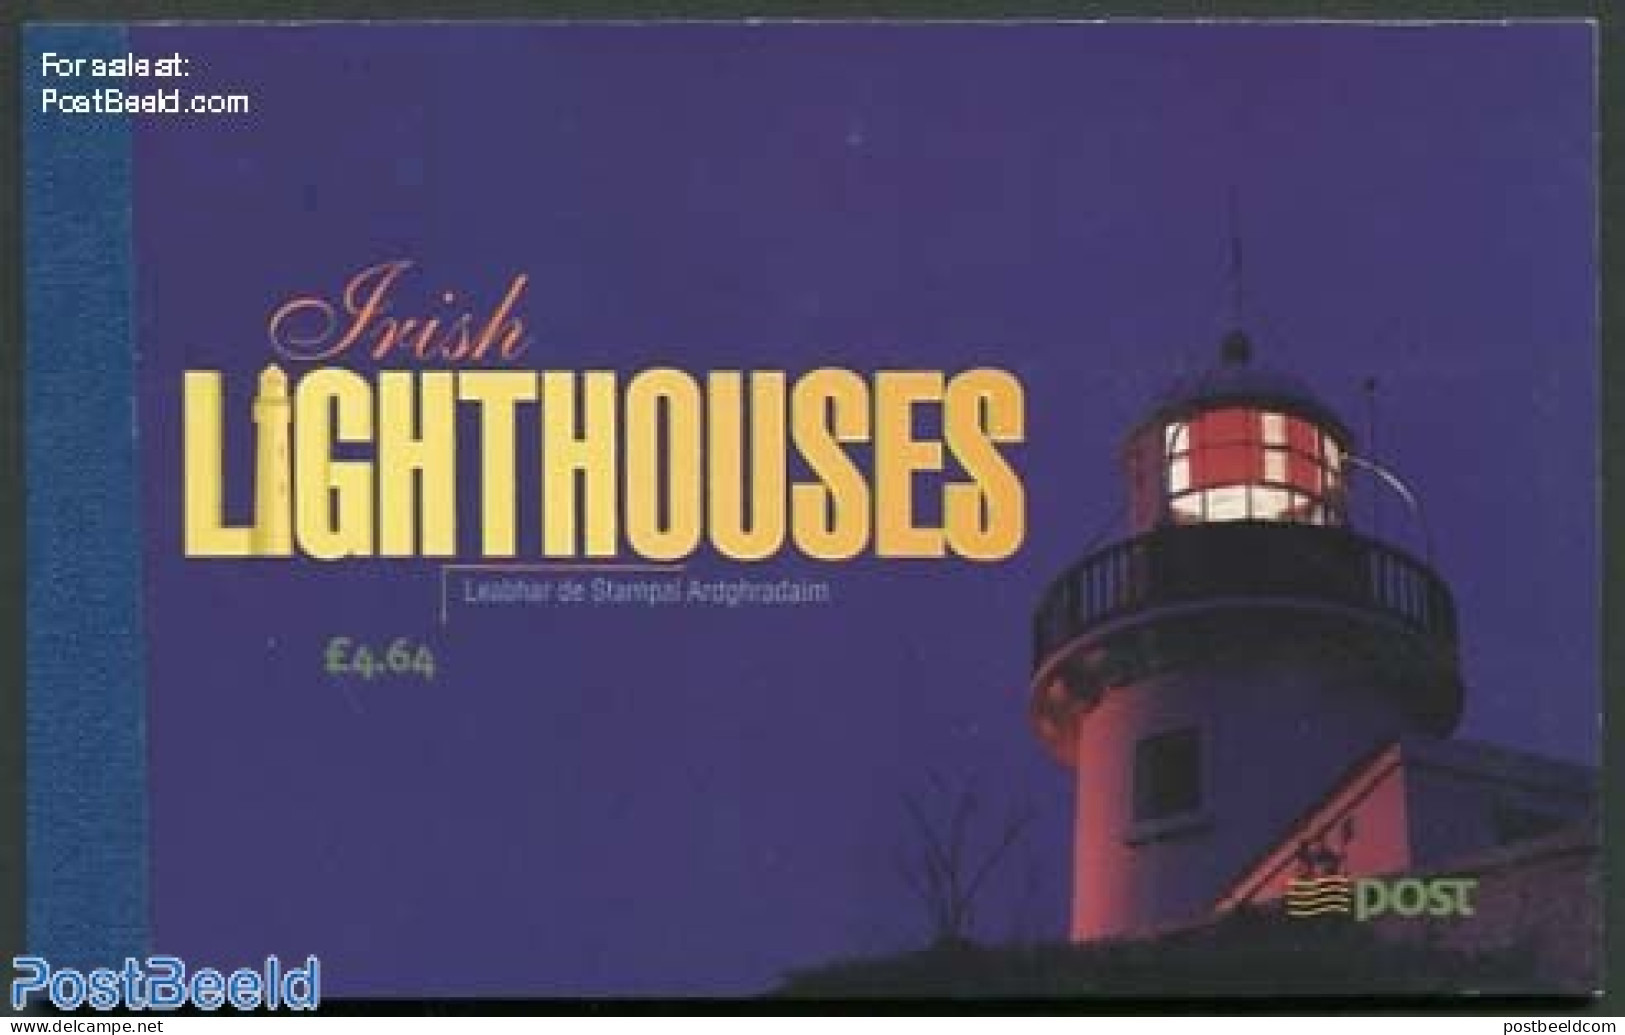 Ireland 1997 Lighthouses Booklet, Mint NH, Various - Stamp Booklets - Lighthouses & Safety At Sea - Nuevos